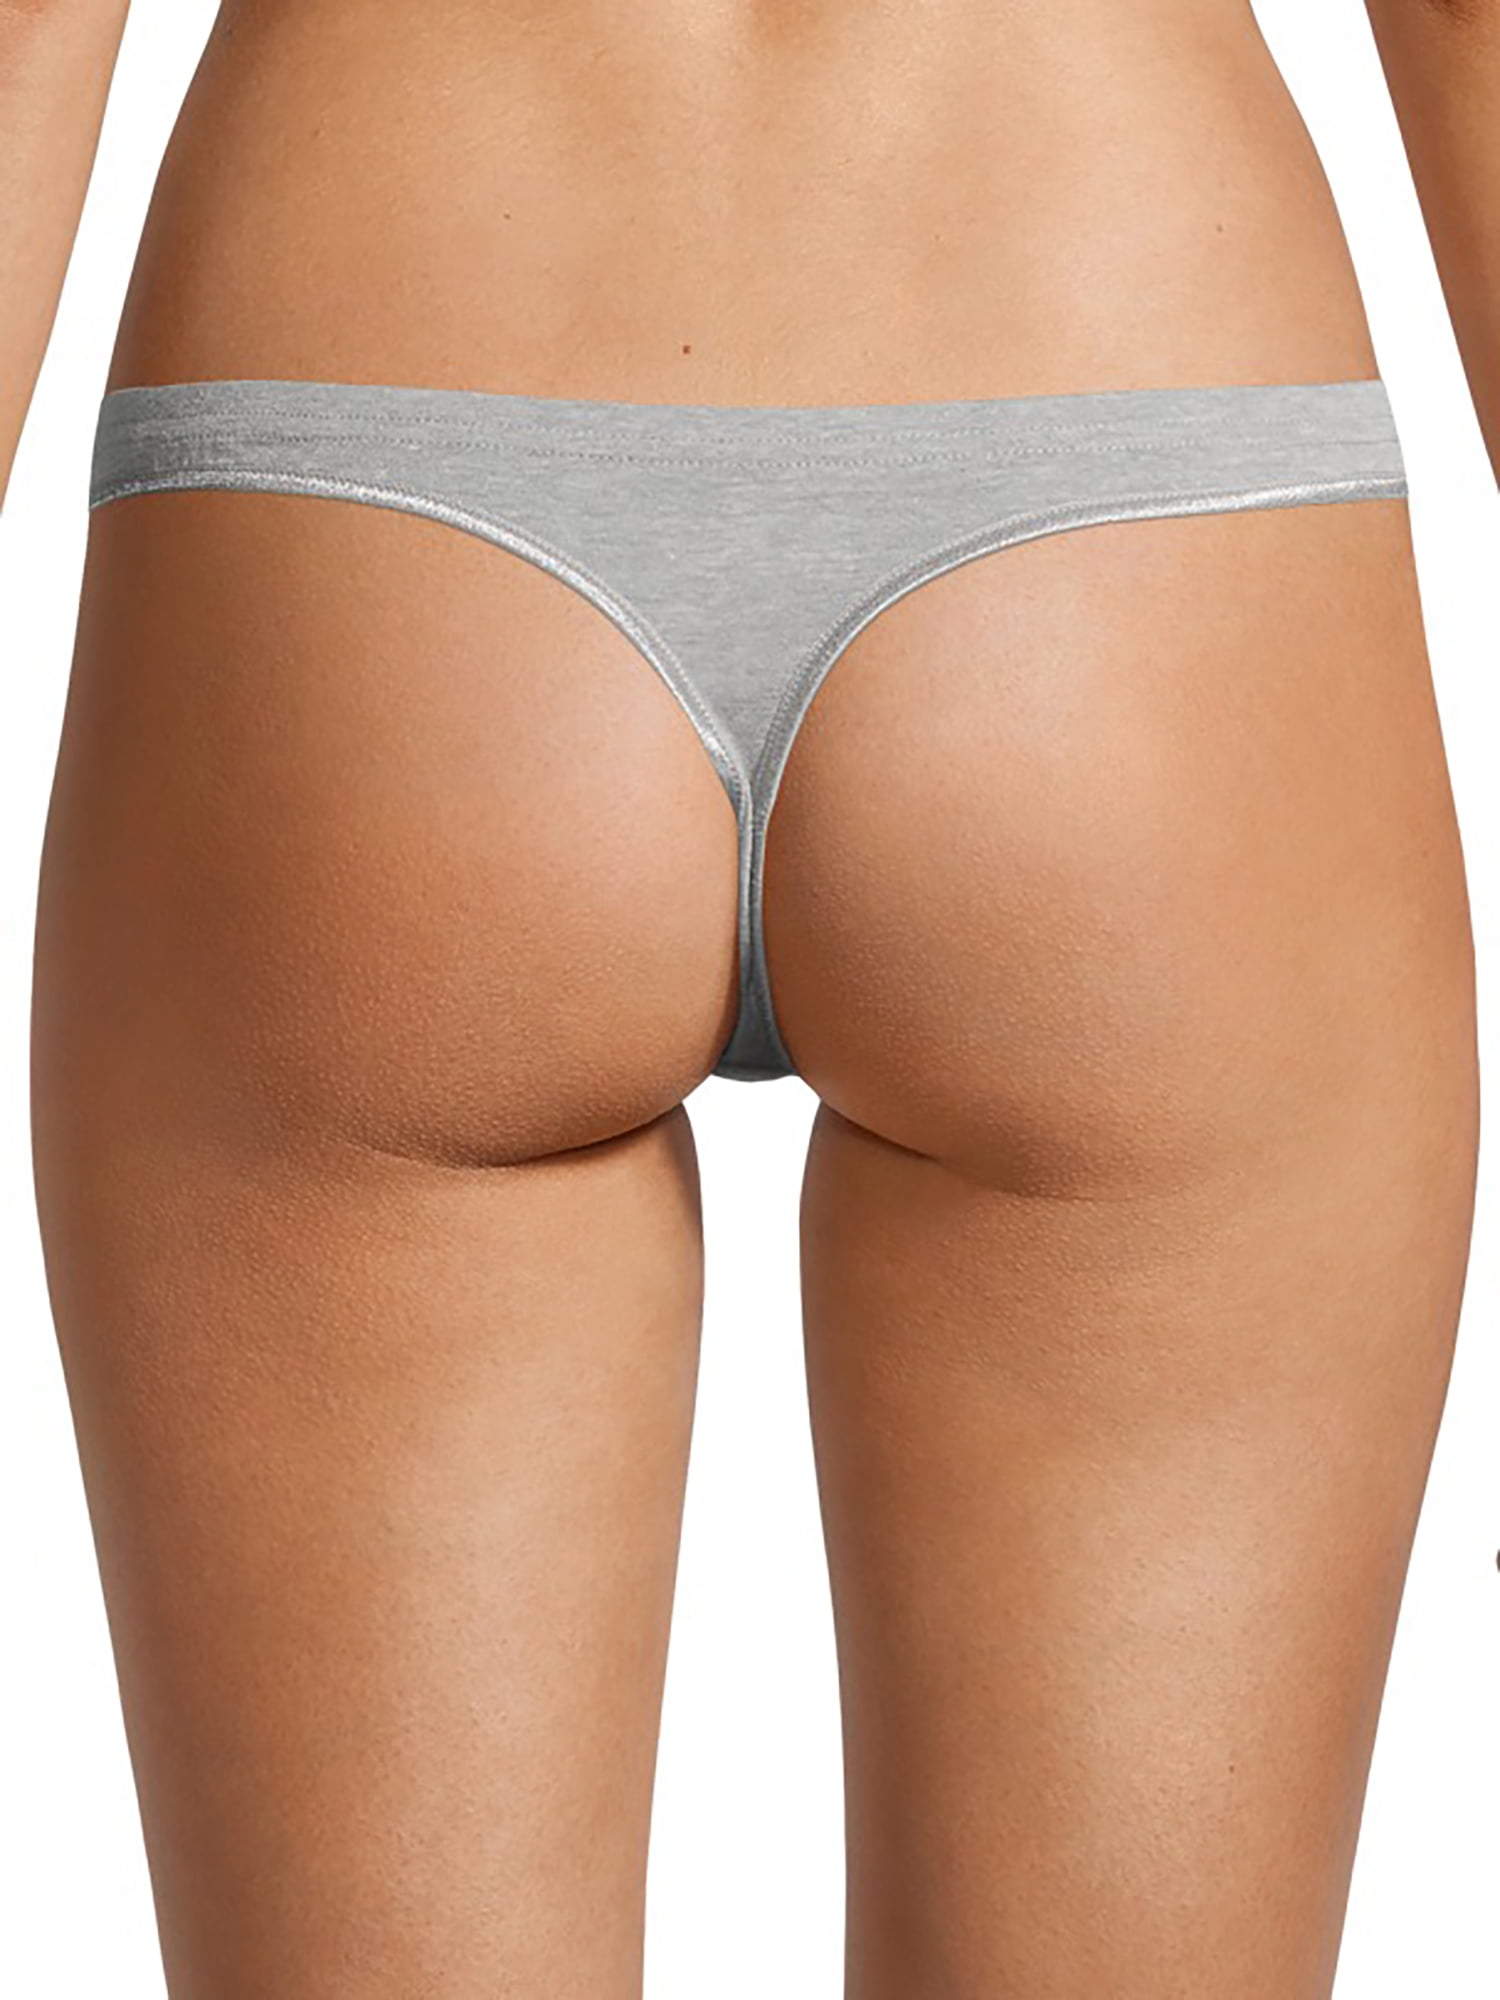 Calia Women's Thong Knickers Sport Fitness Stretch Cotton Lined